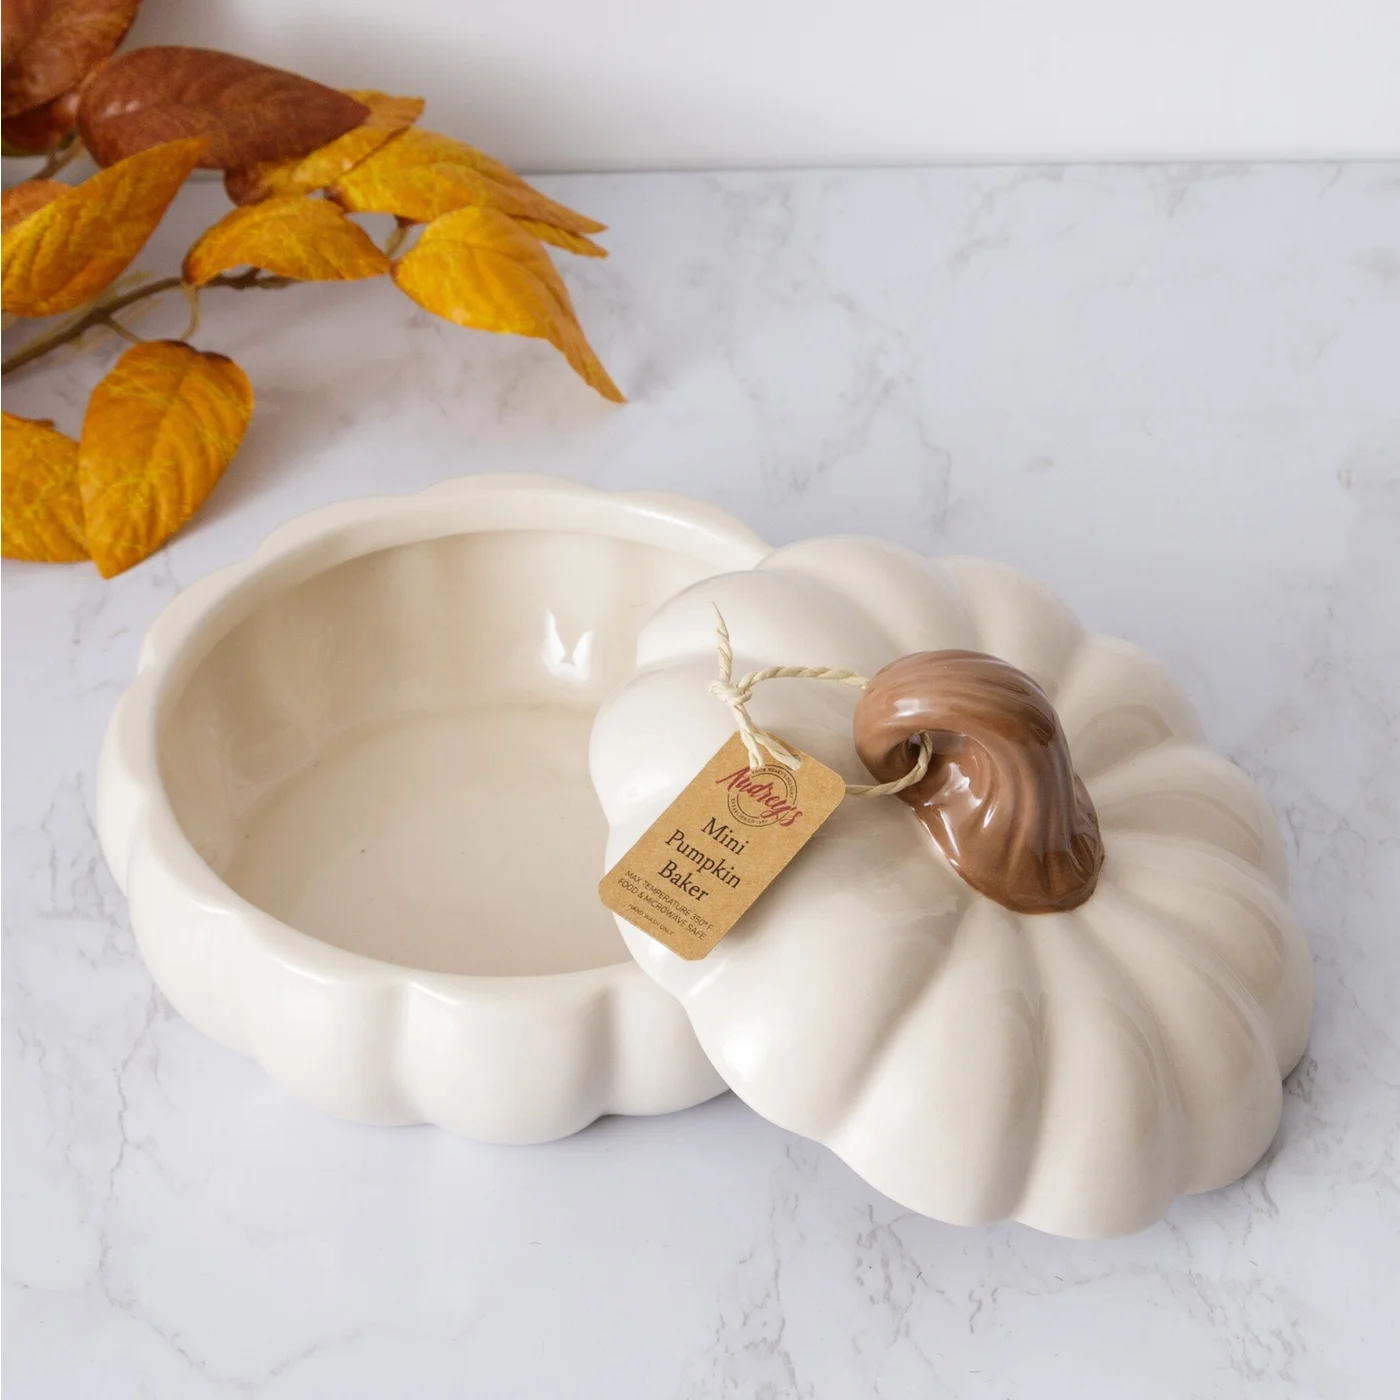 Small White Pumpkin Stoneware Baker Lidded Container